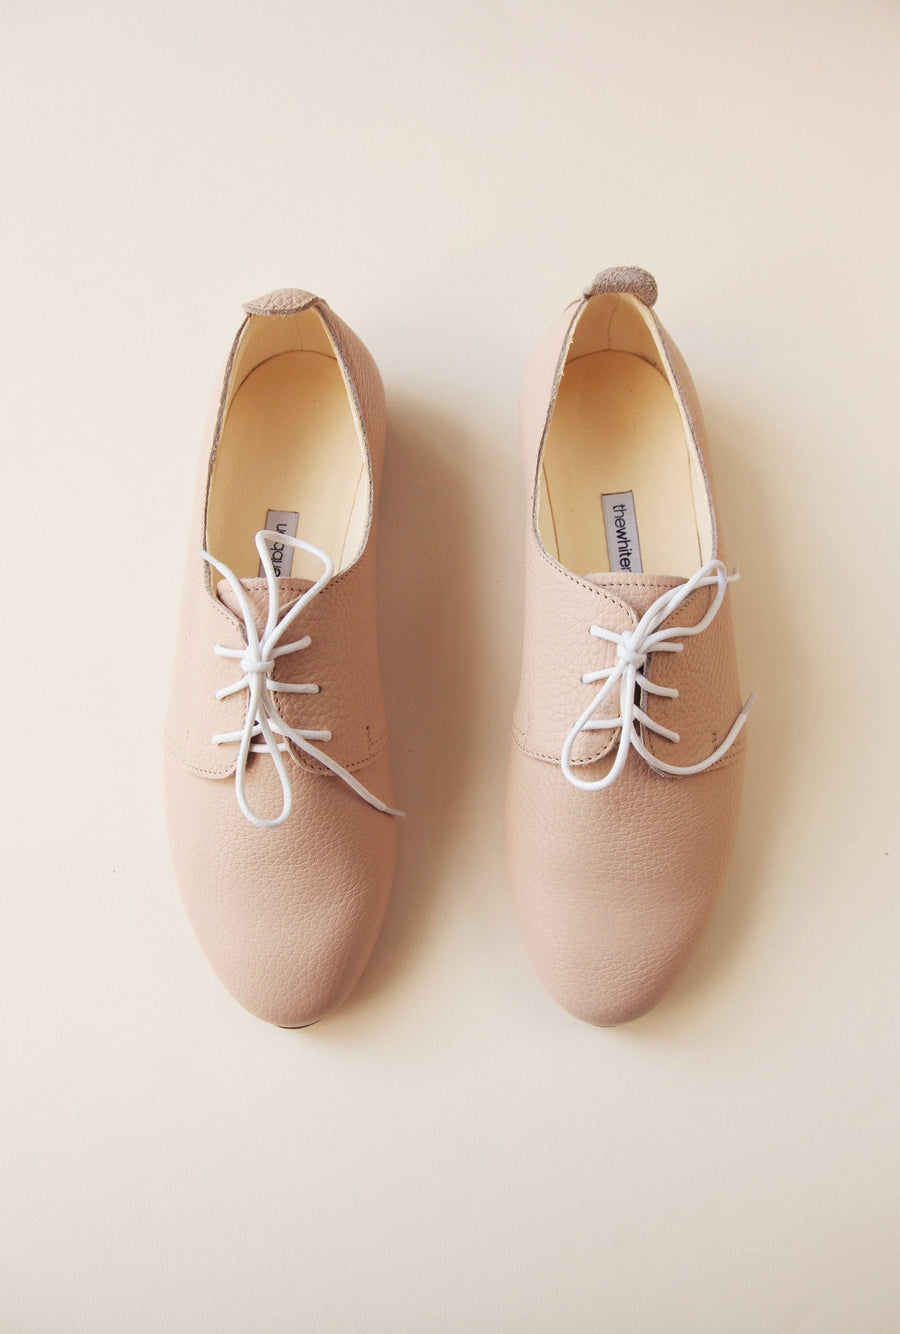 AMIRA Oxford Shoes - Nude Textured